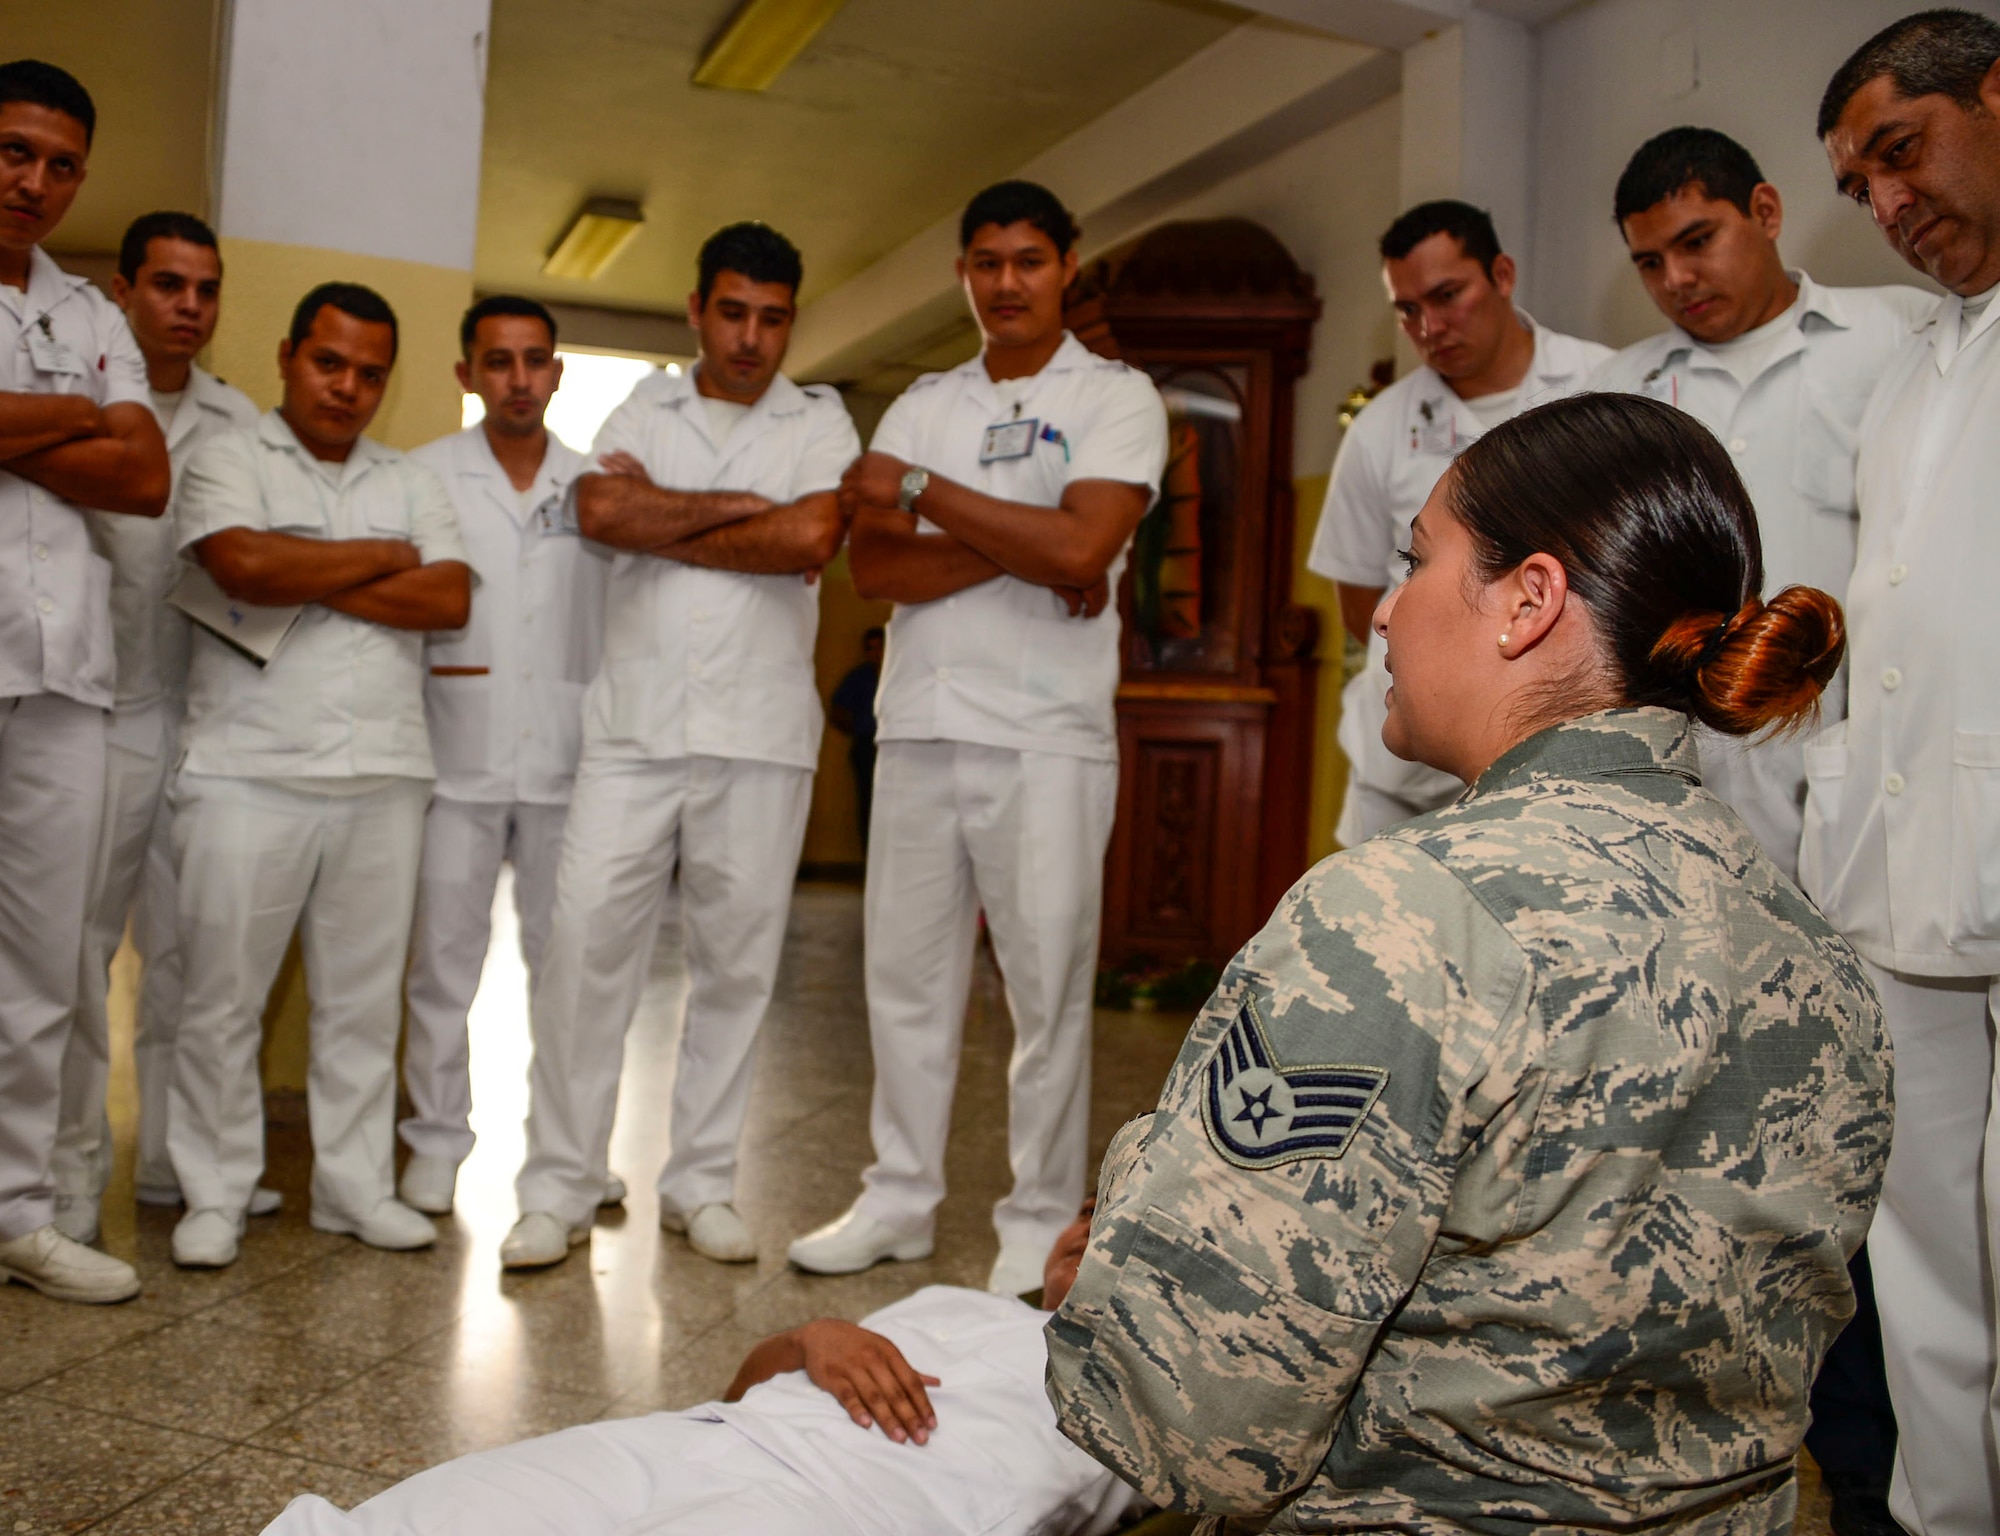 U.S. Air Force Staff Sgt. Karina Cortes, a medical technician stationed at Joint Base Charleston, S.C., briefs to medical technicians in training on litter carry techniques at Hospital Militar de El Salvador during a medical subject matter expert exchange in San Salvador, El Salvador, March 11, 2016. Earlier in the week, Carey led a team of Air Force medical professionals in a week-long exchange with Salvadoran medics at Ilopango Air Base.  After the subject matter expert exchange was completed, the team was invited to a share their expertise with members of the Hospital Militar de El Salvador.  (U.S. Air Force photo by Tech. Sgt. Heather R. Redman/Released)